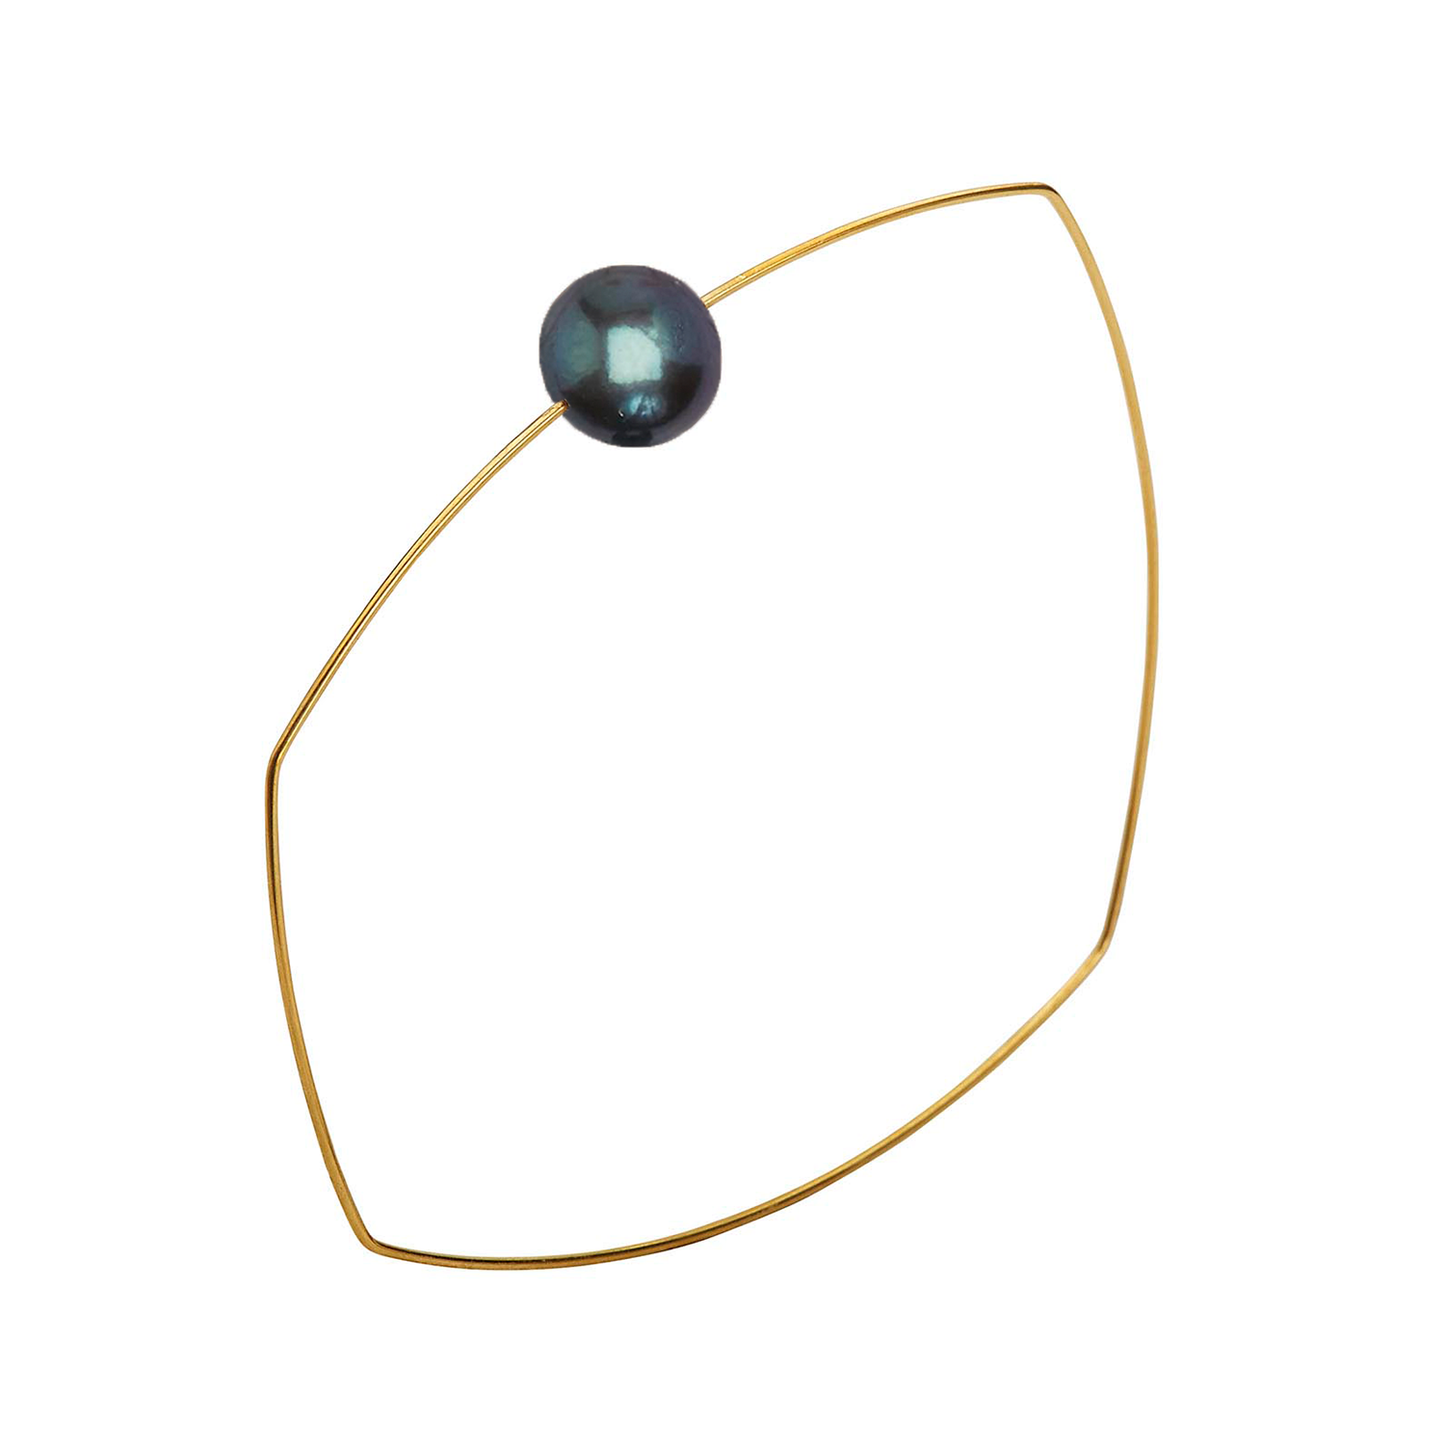 Asymmetric Square Bangle with 9mm Round Freshwater Pearl